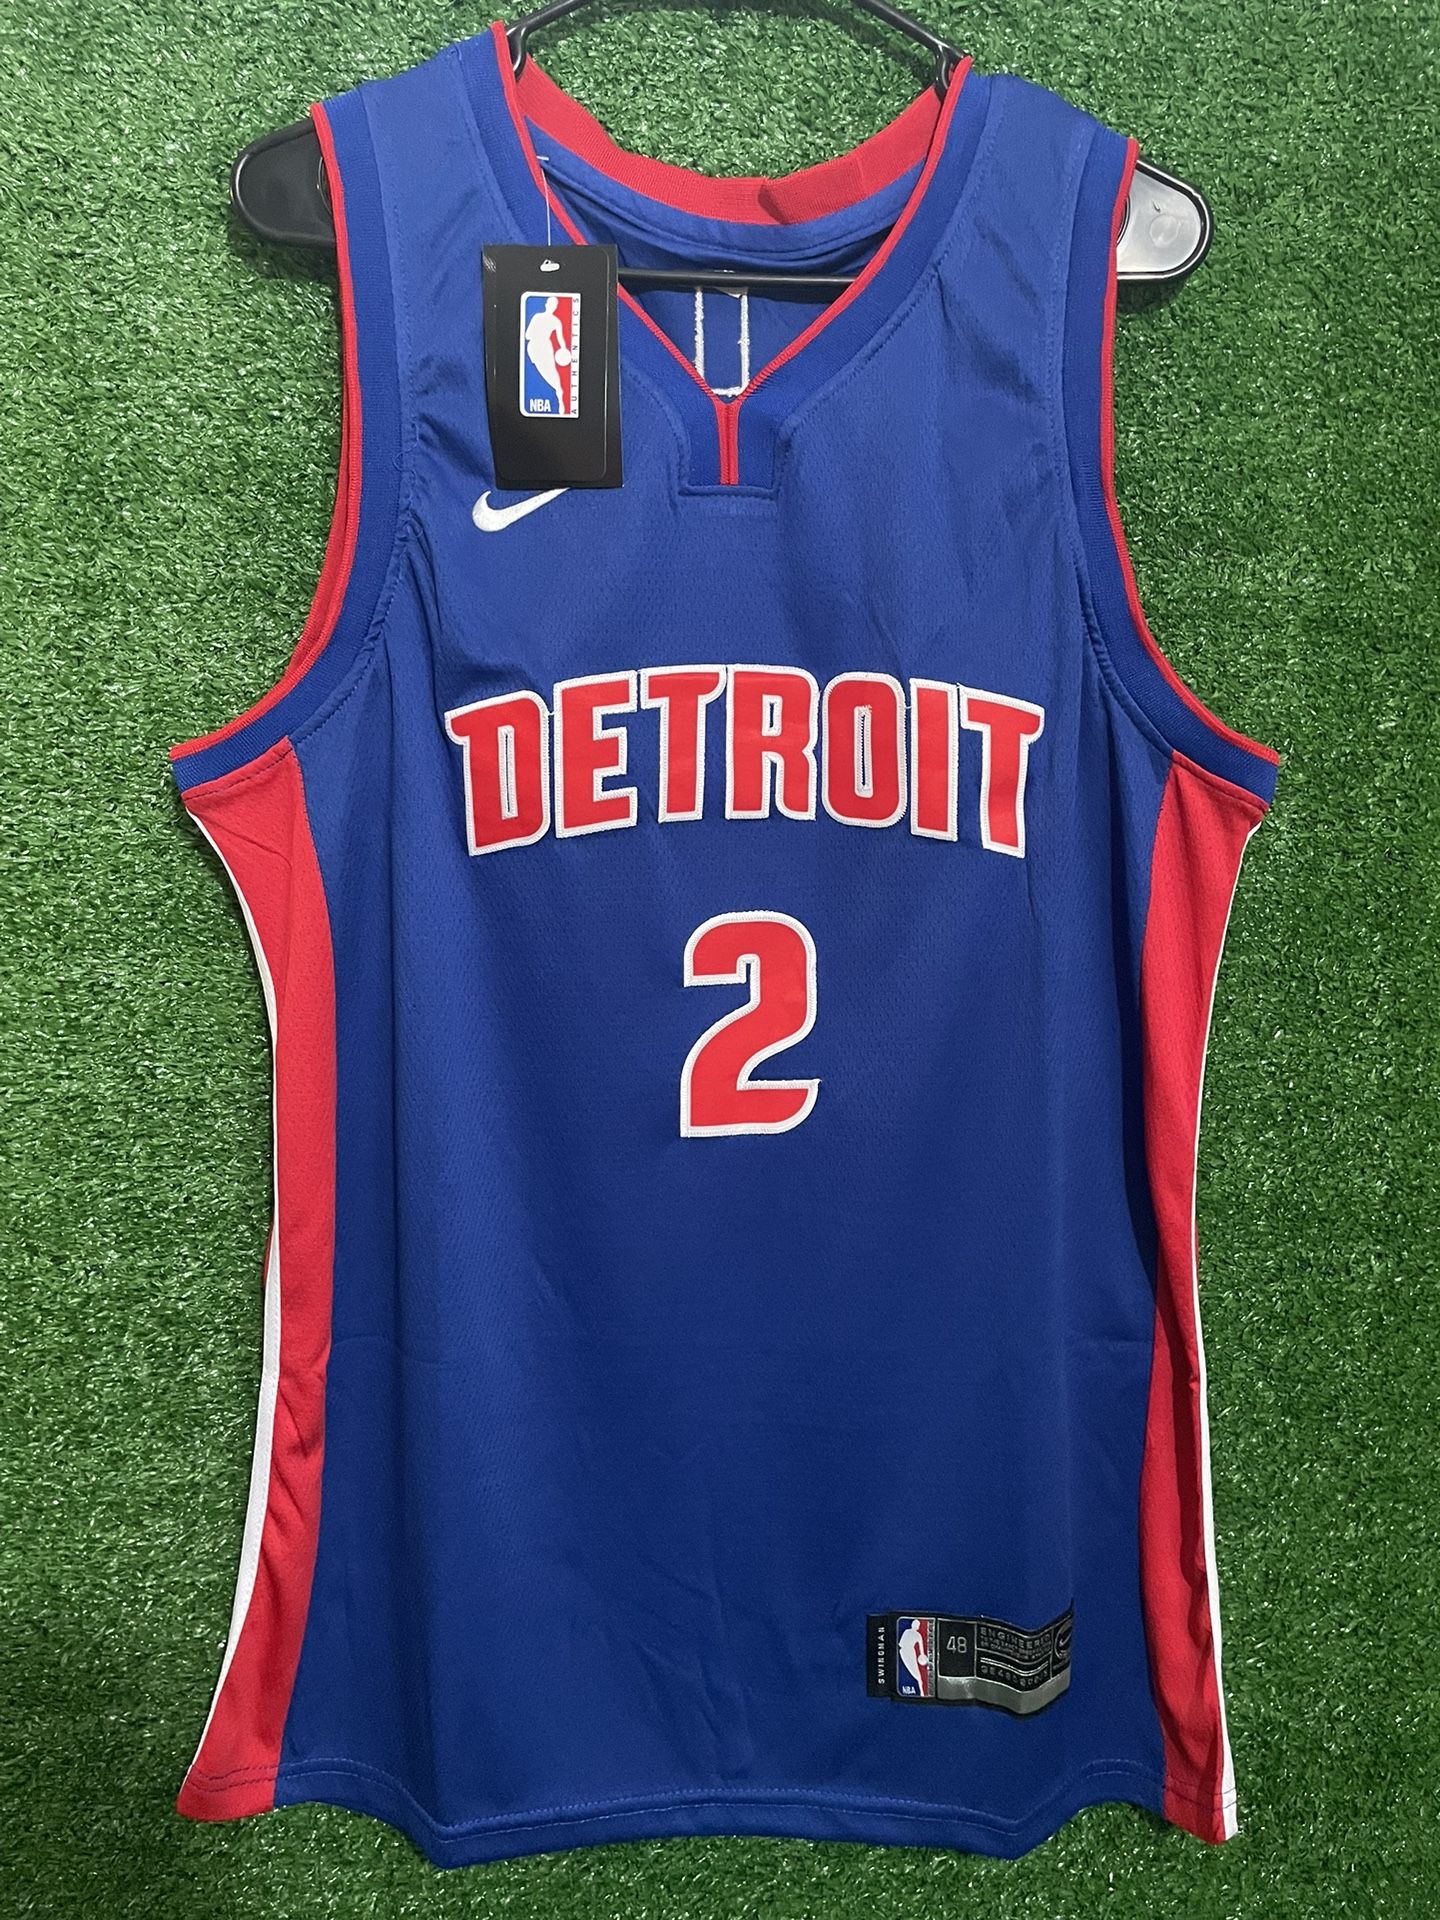 CADE CUNNINGHAM DETROIT PISTONS NIKE JERSEY BRAND NEW WITH TAGS SIZES MEDIUM AND XL AVAILABLE